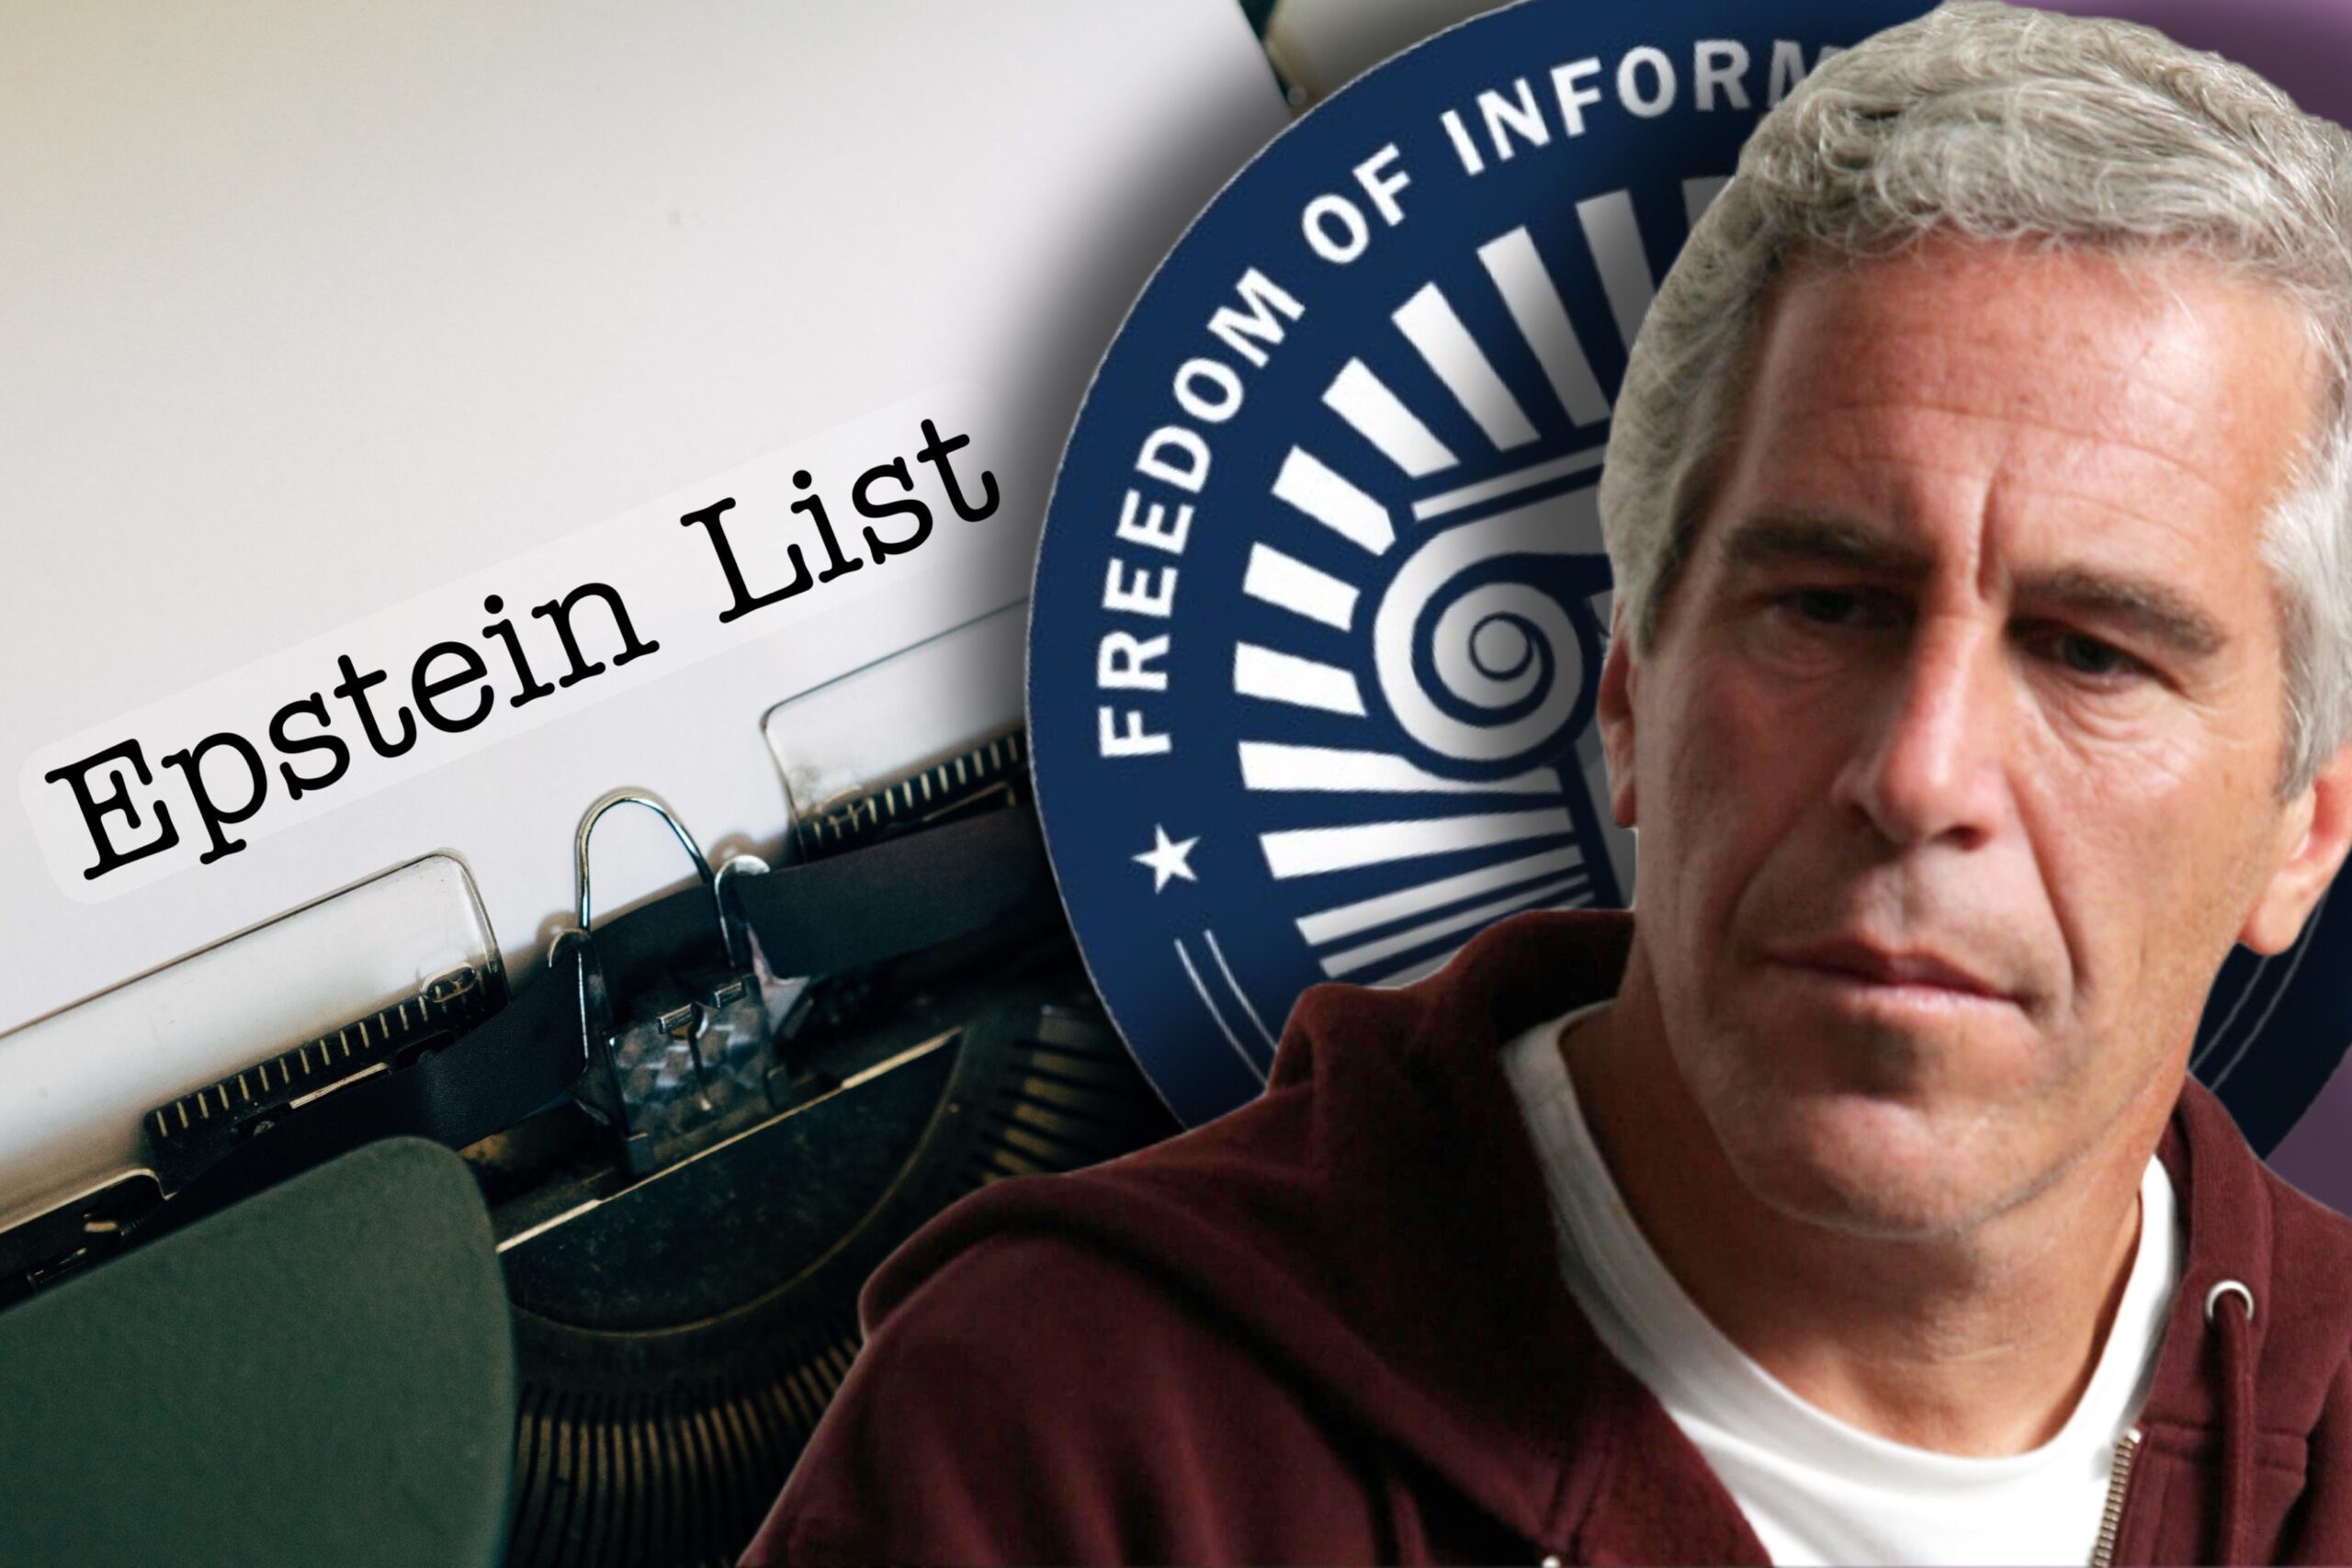 NextImg:REPORT: Final Court Documents Containing Names Of And "Salacious" Information On Epstein's Cronies To Be Unsealed - Will Bill Clinton Be Mentioned?